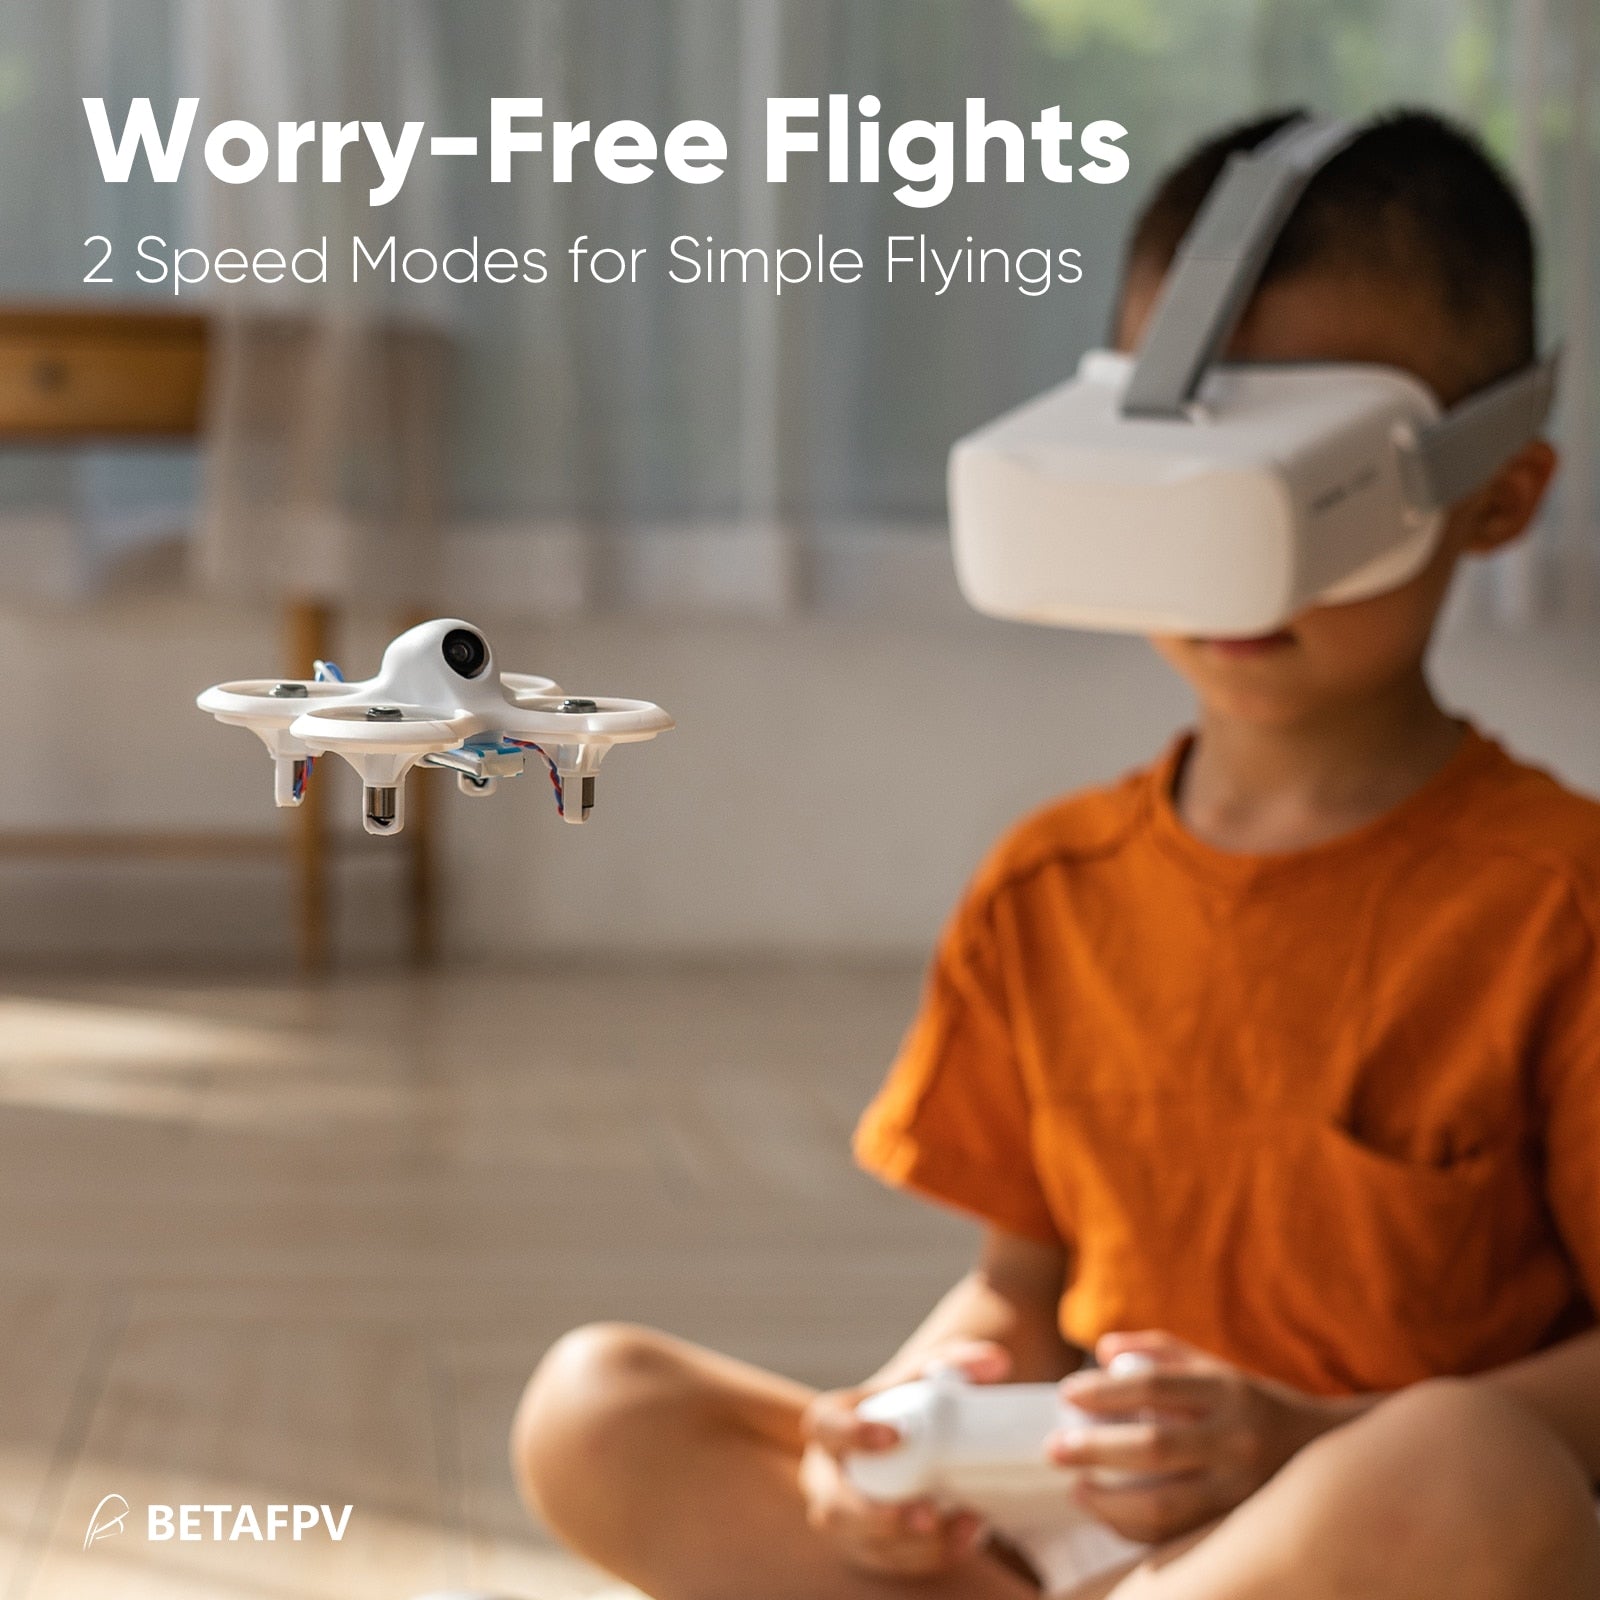 Worry-Free Flights 2 Speed Modes for Simple Flyings BETAFP